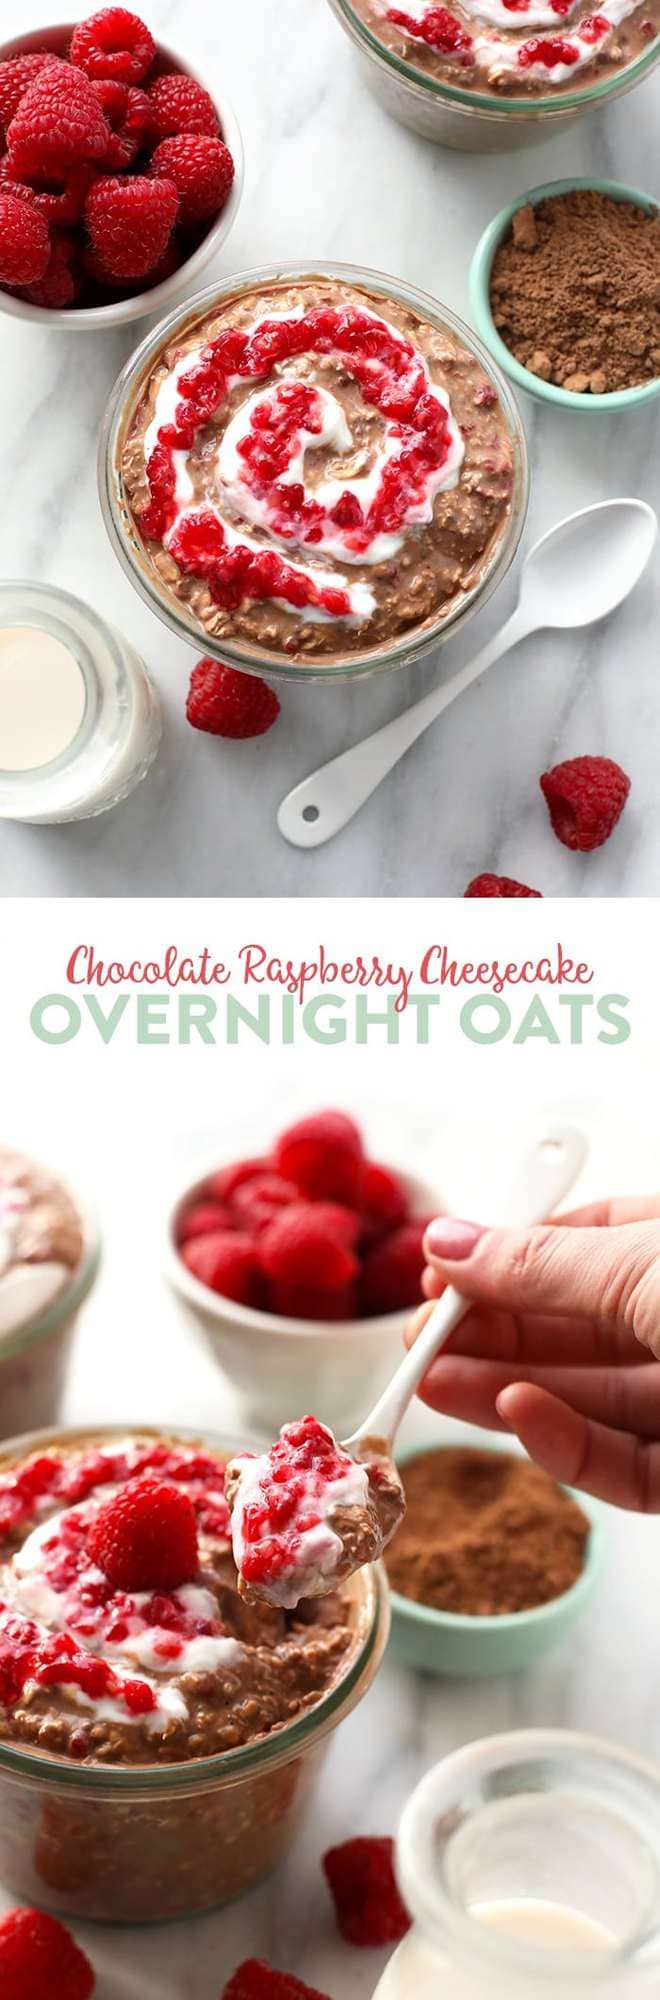 Nothing like cheesecake for breakfast. This Chocolate Raspberry Cheesecake Overnight Oatmeal recipe is prepped in less than 5 minutes so that you can have a healthy breakfast ready to go in seconds in the AM. 